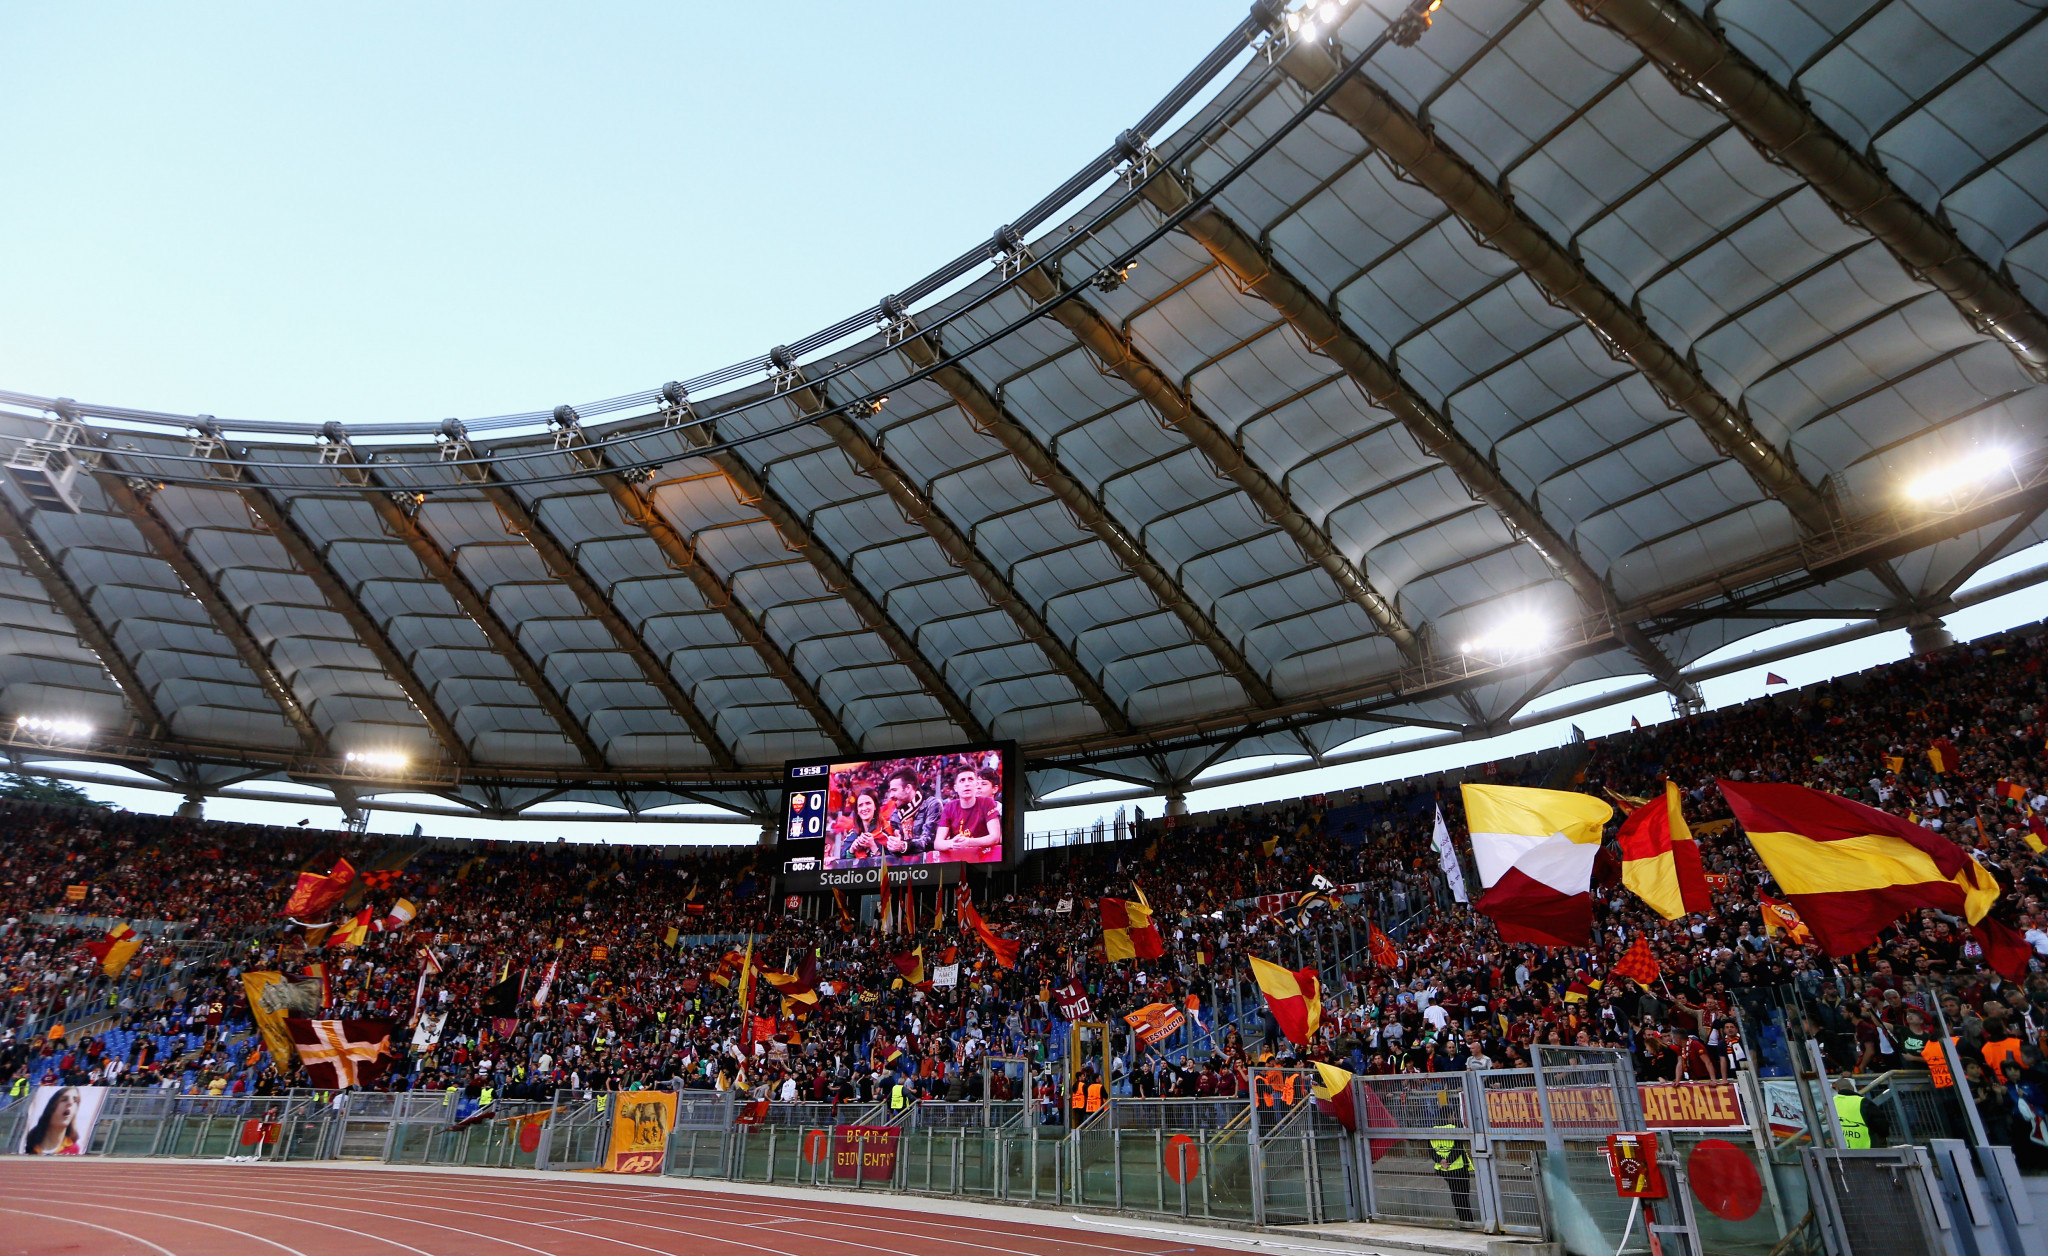 Roma have played their home matches at the Stadio Olimpico since 1953 ©Getty Images